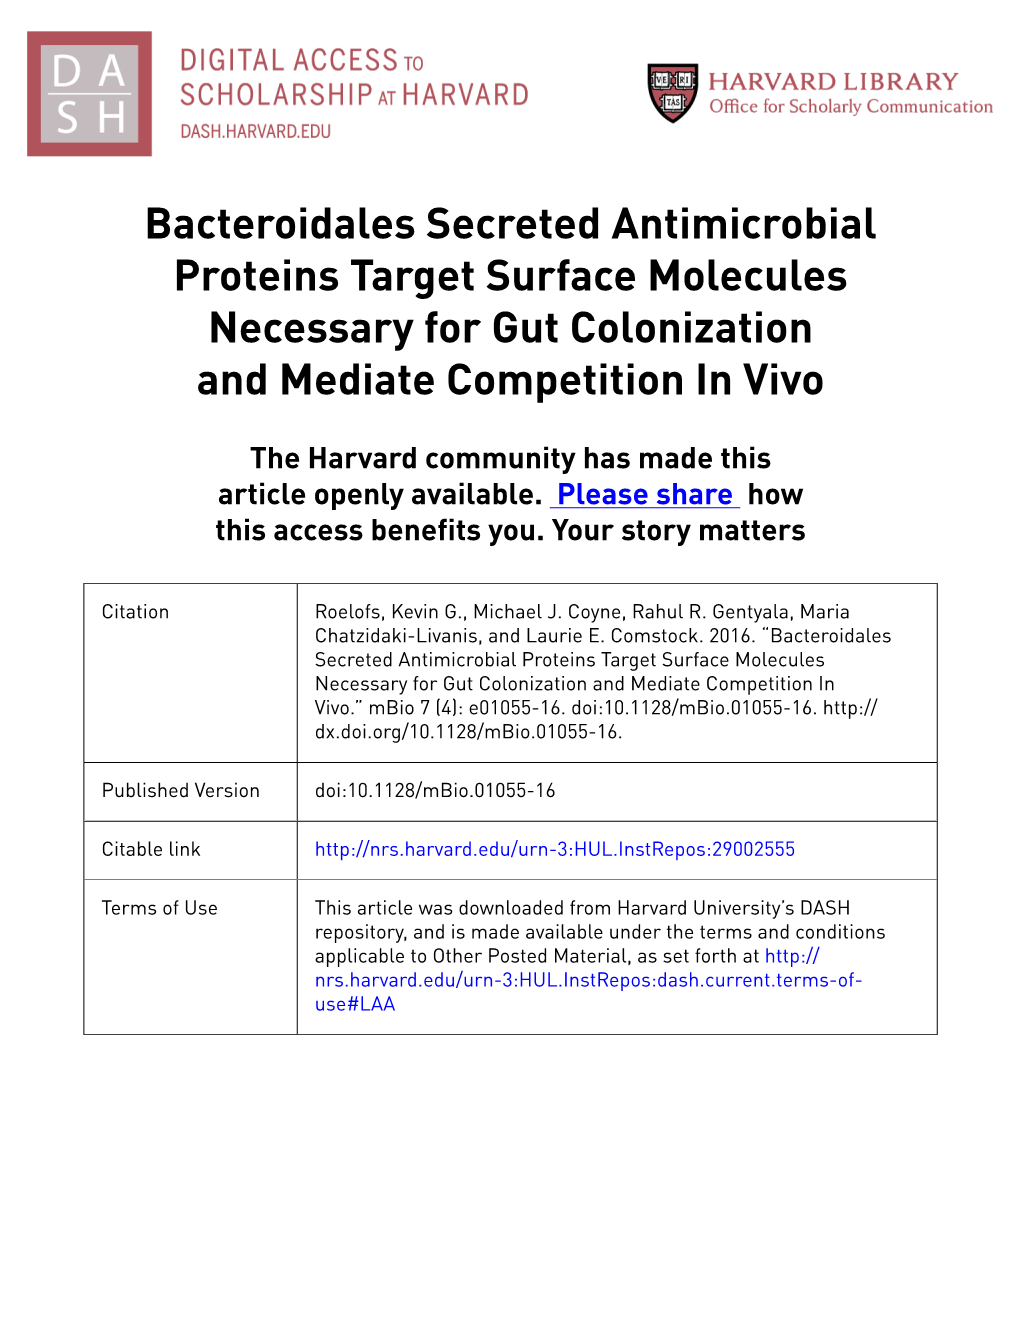 Bacteroidales Secreted Antimicrobial Proteins Target Surface Molecules Necessary for Gut Colonization and Mediate Competition in Vivo